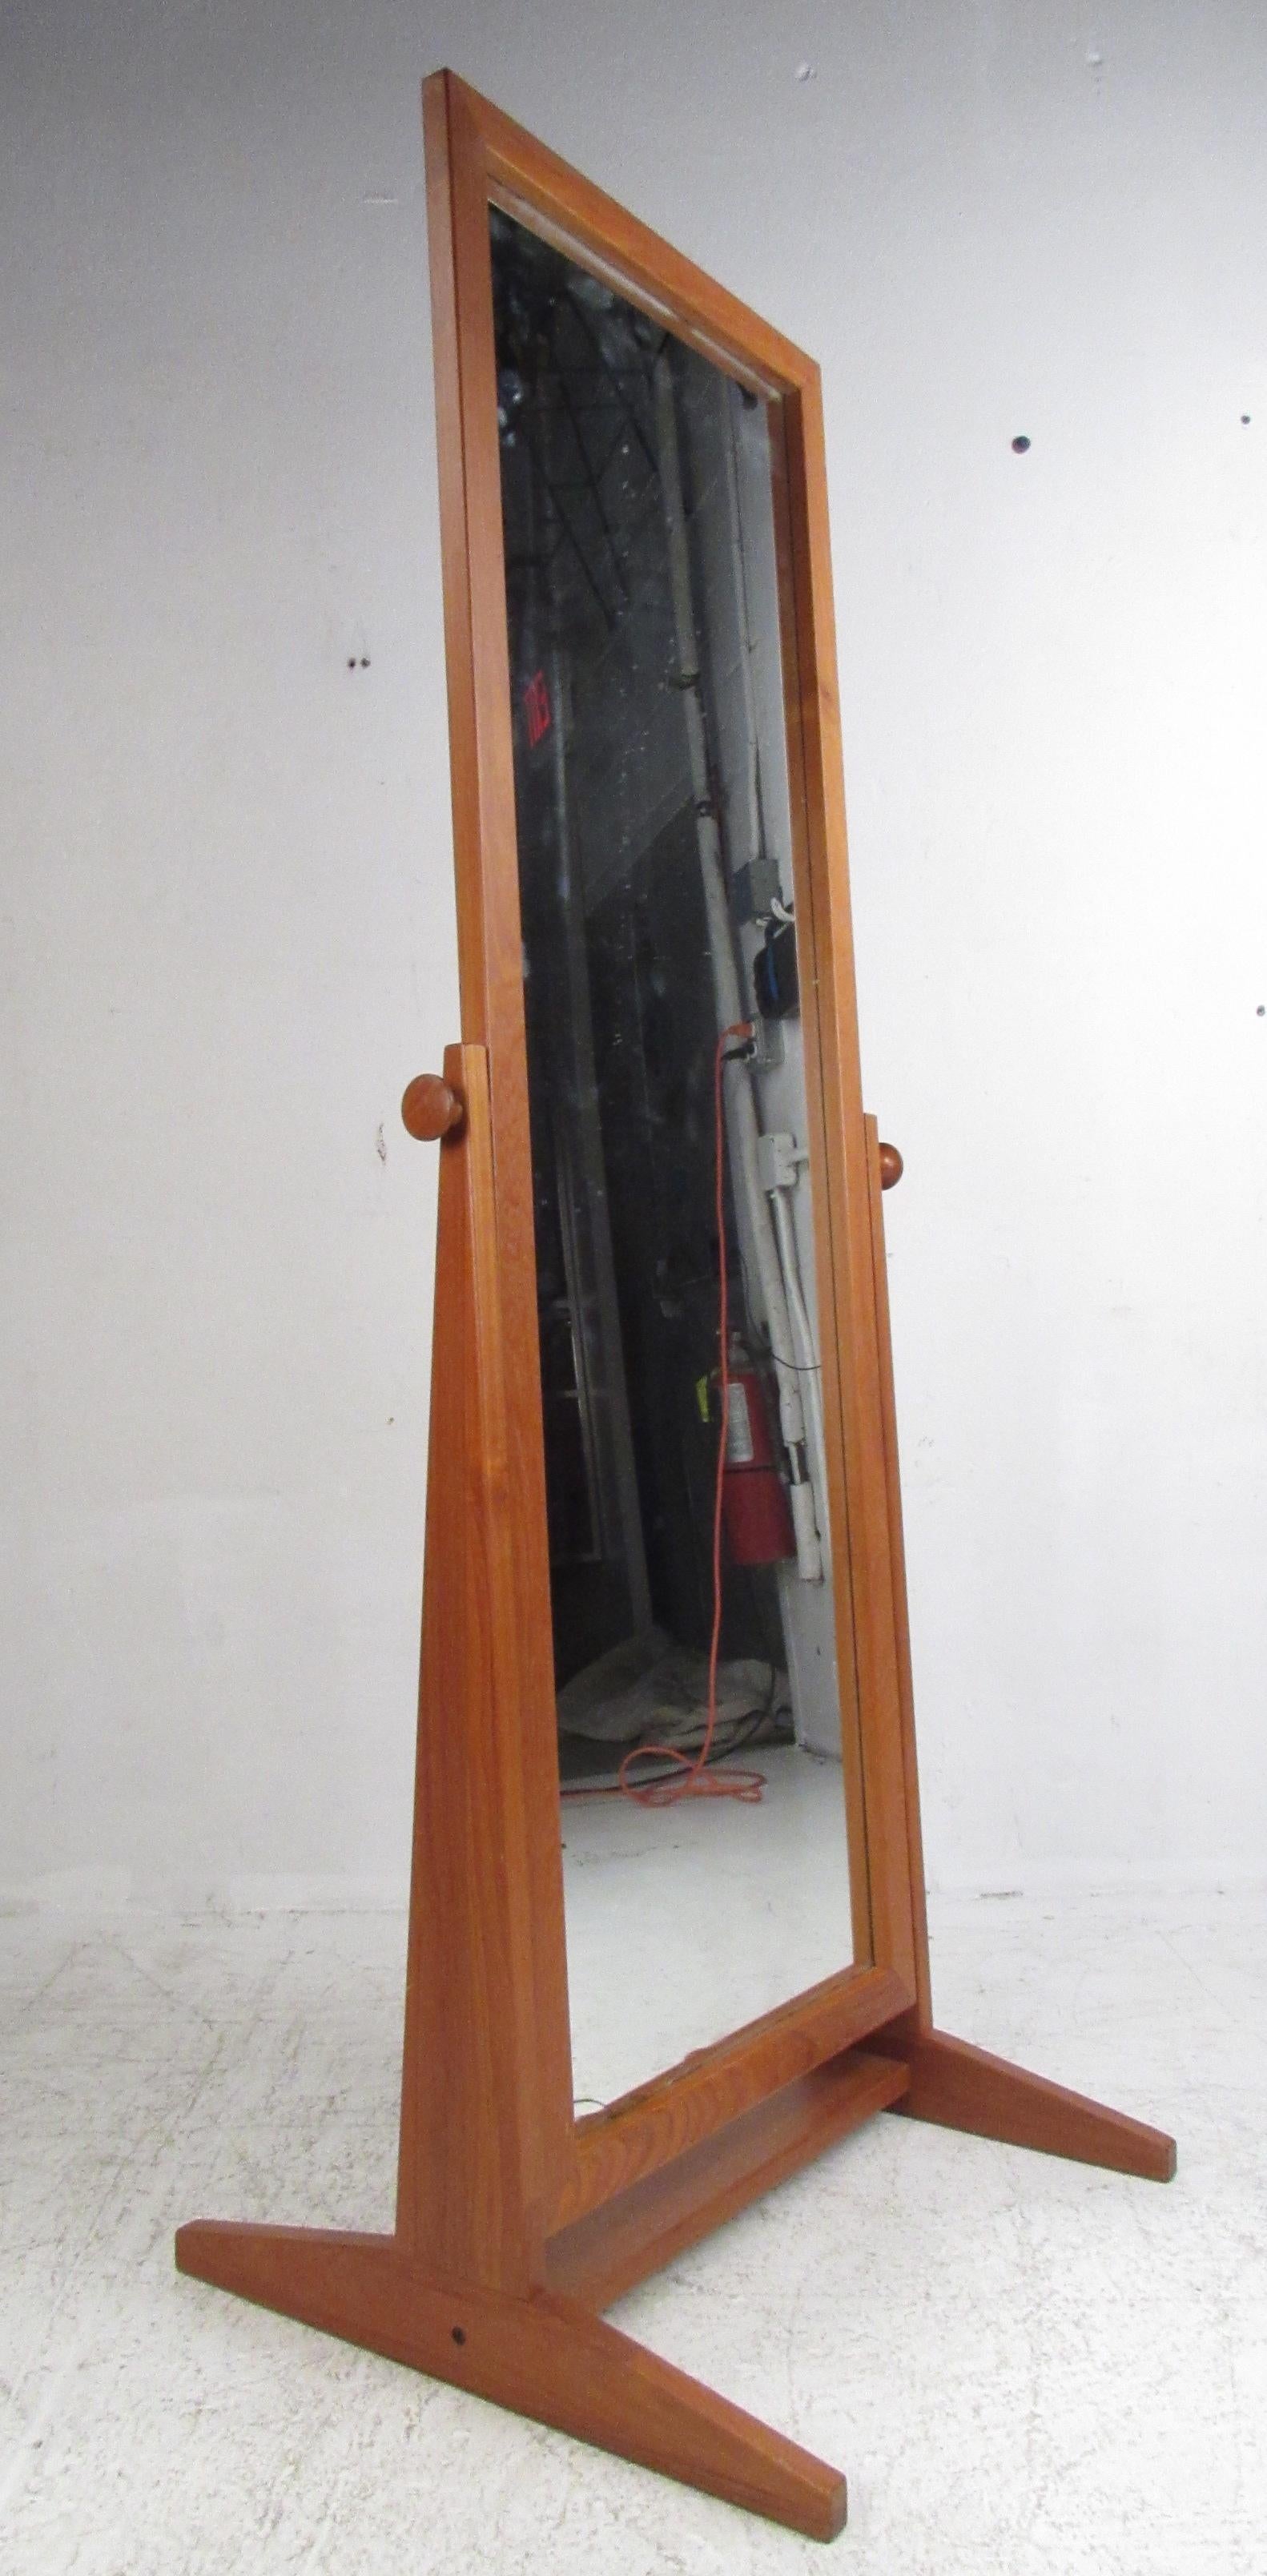 This beautiful vintage modern floor mirror features a teak frame with a floating full size mirror on a swivel. Stylish design with side supports that taper upward from the base creating an angular appearance. The sculpted knobs on each side easily